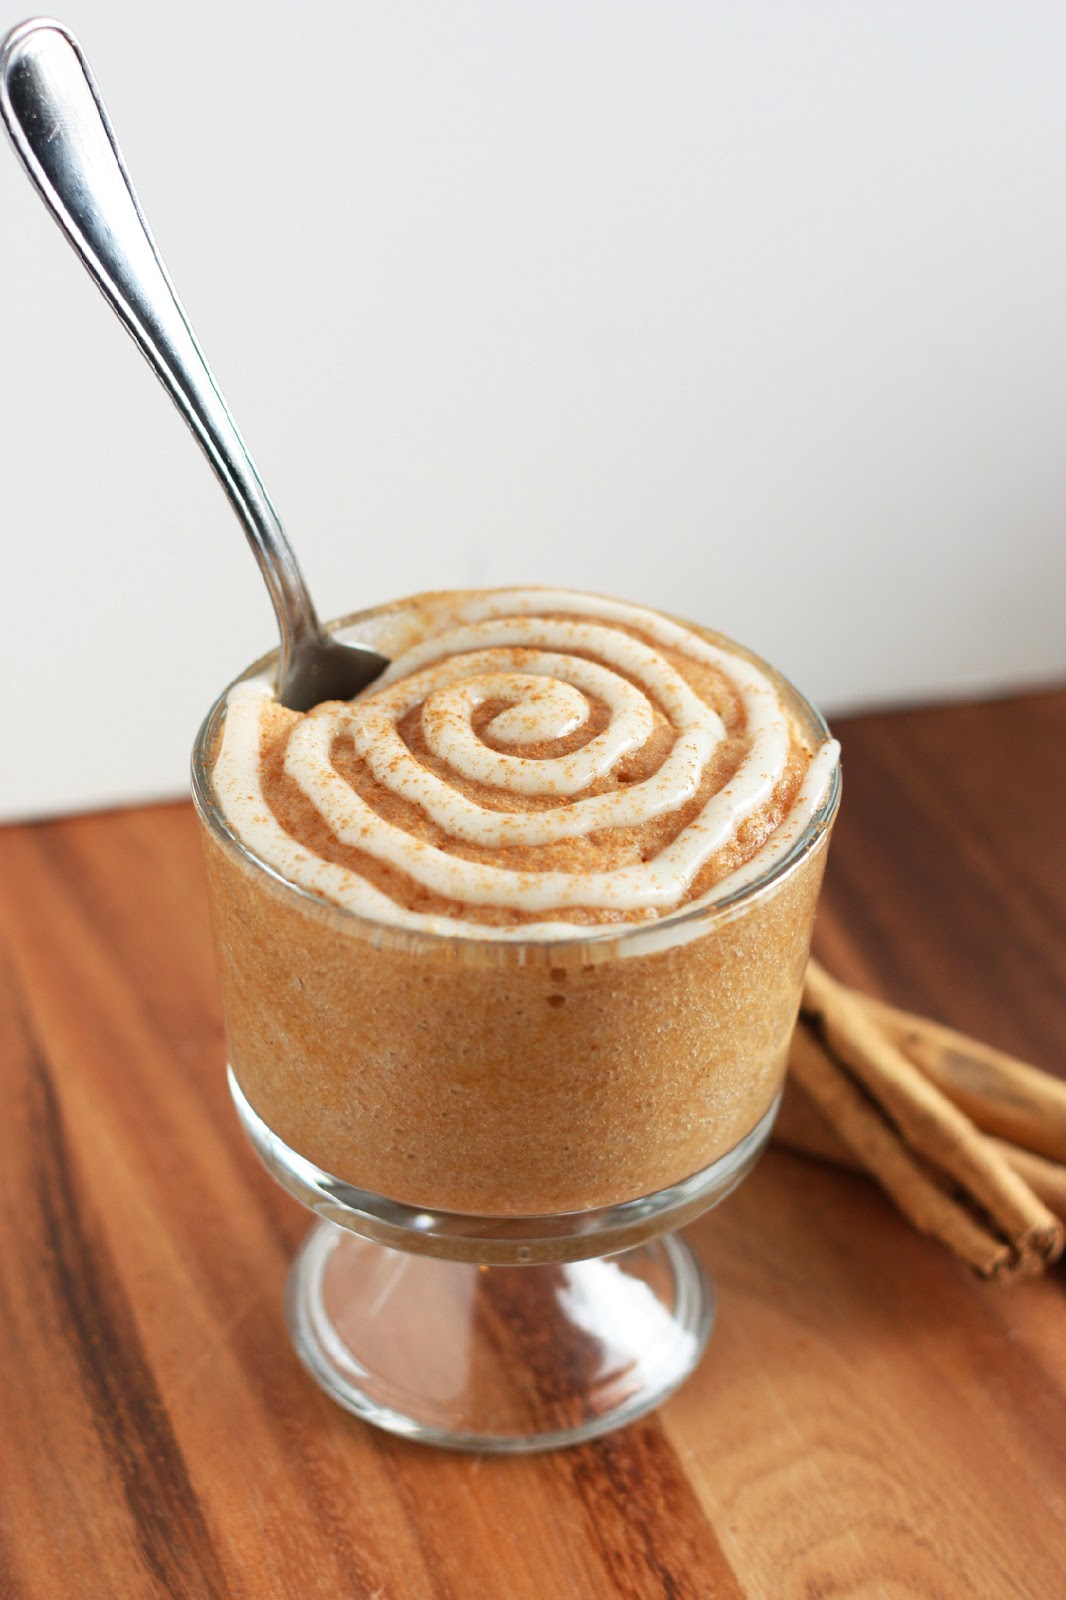 Cinnamon Roll Mug Cake (made in 3 minutes!) - Cooking Classy